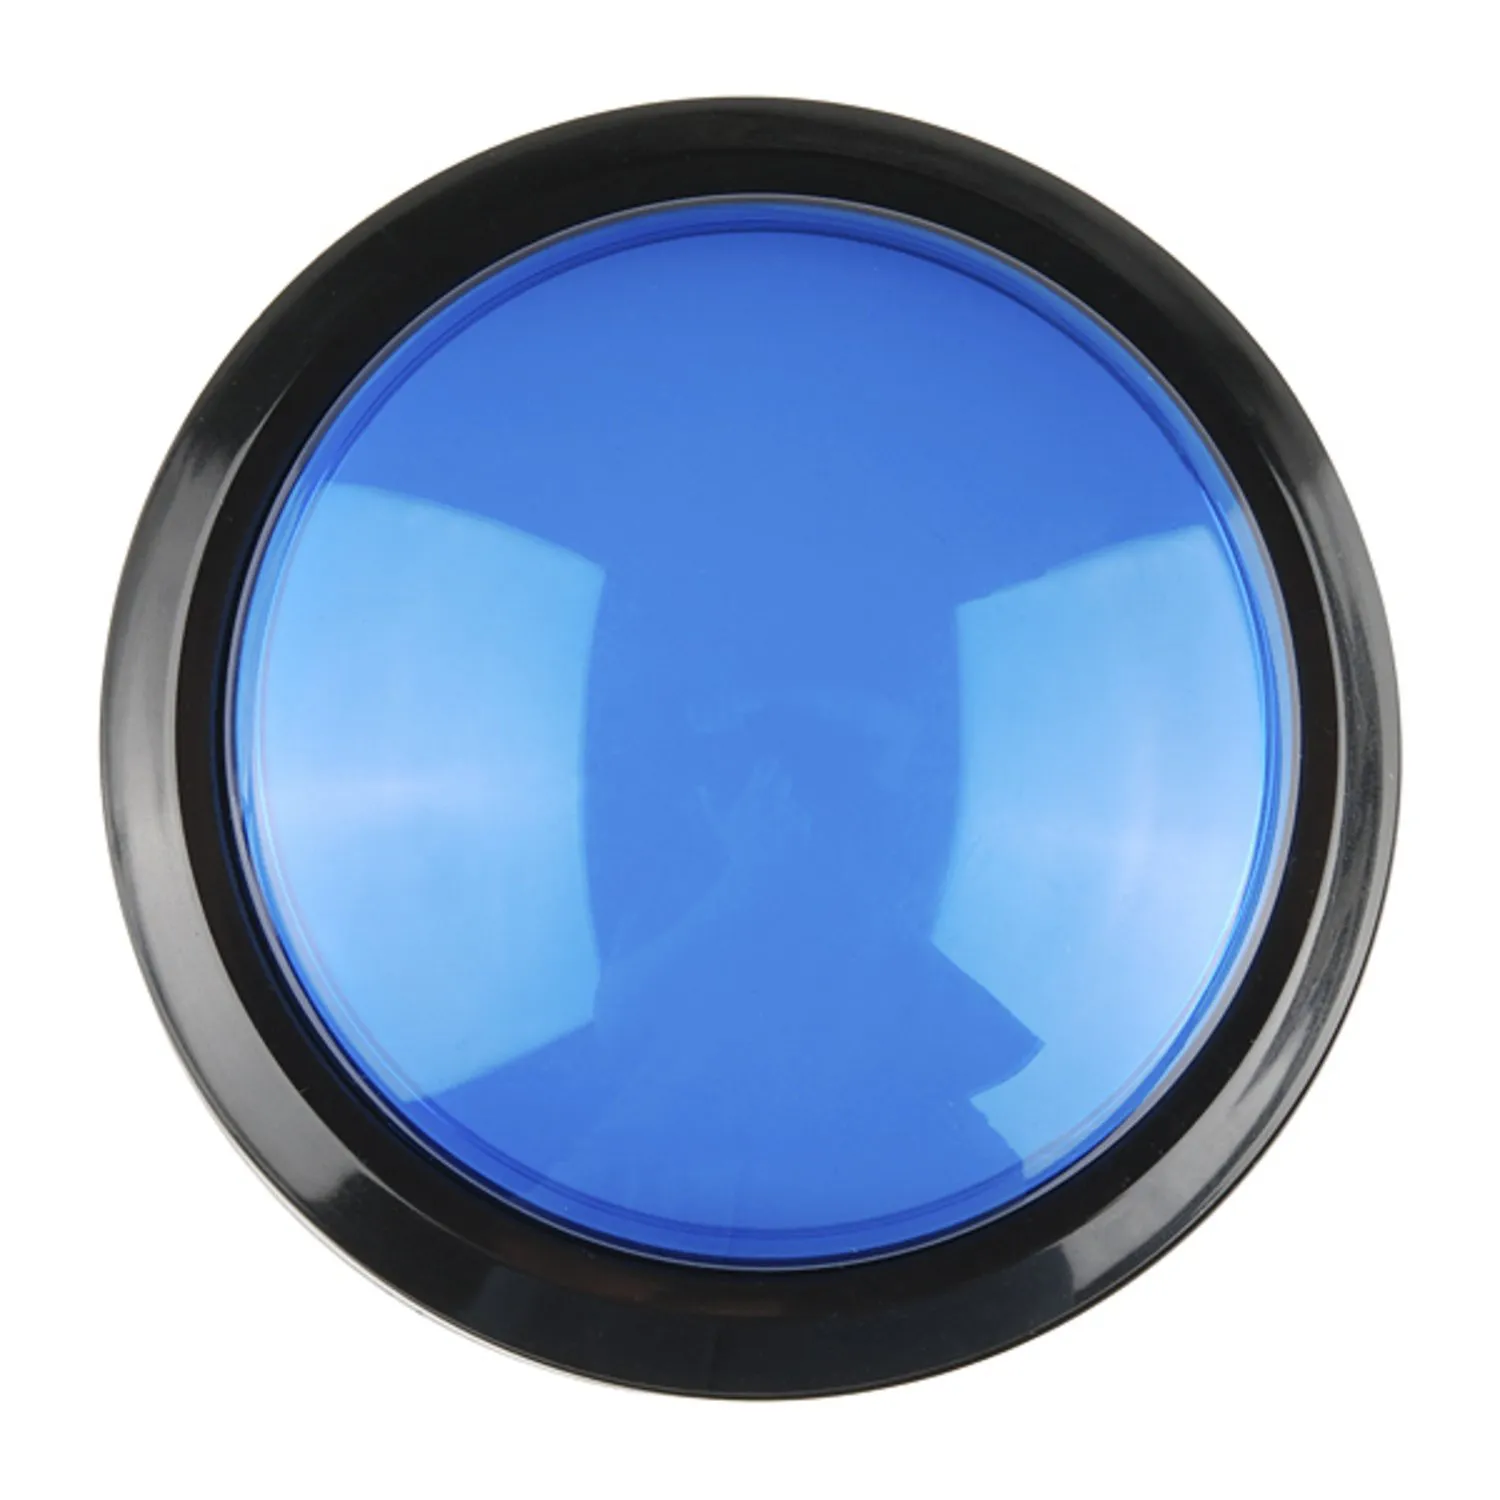 Photo of Big Dome Pushbutton - Blue